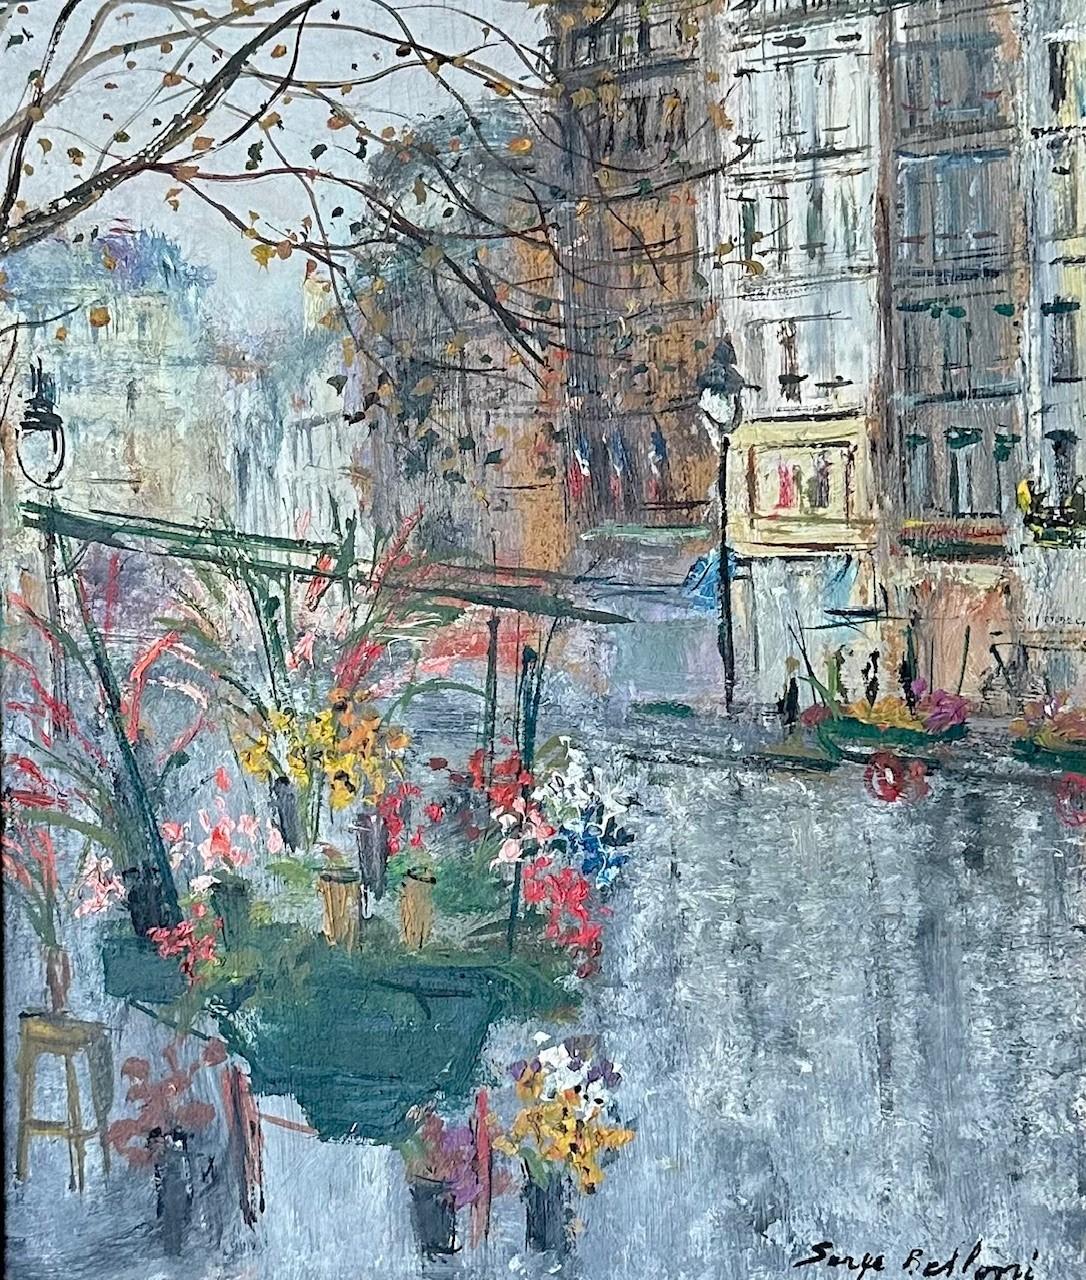 Original Serge Belloni Parisian Cityscape. Signed Framed Autumn Painting on Board.

Charming Parisian cityscape, signed and framed oil on artist board by Serge Belloni. The painting displays essential features of Belloni’s renowned Parisian works.